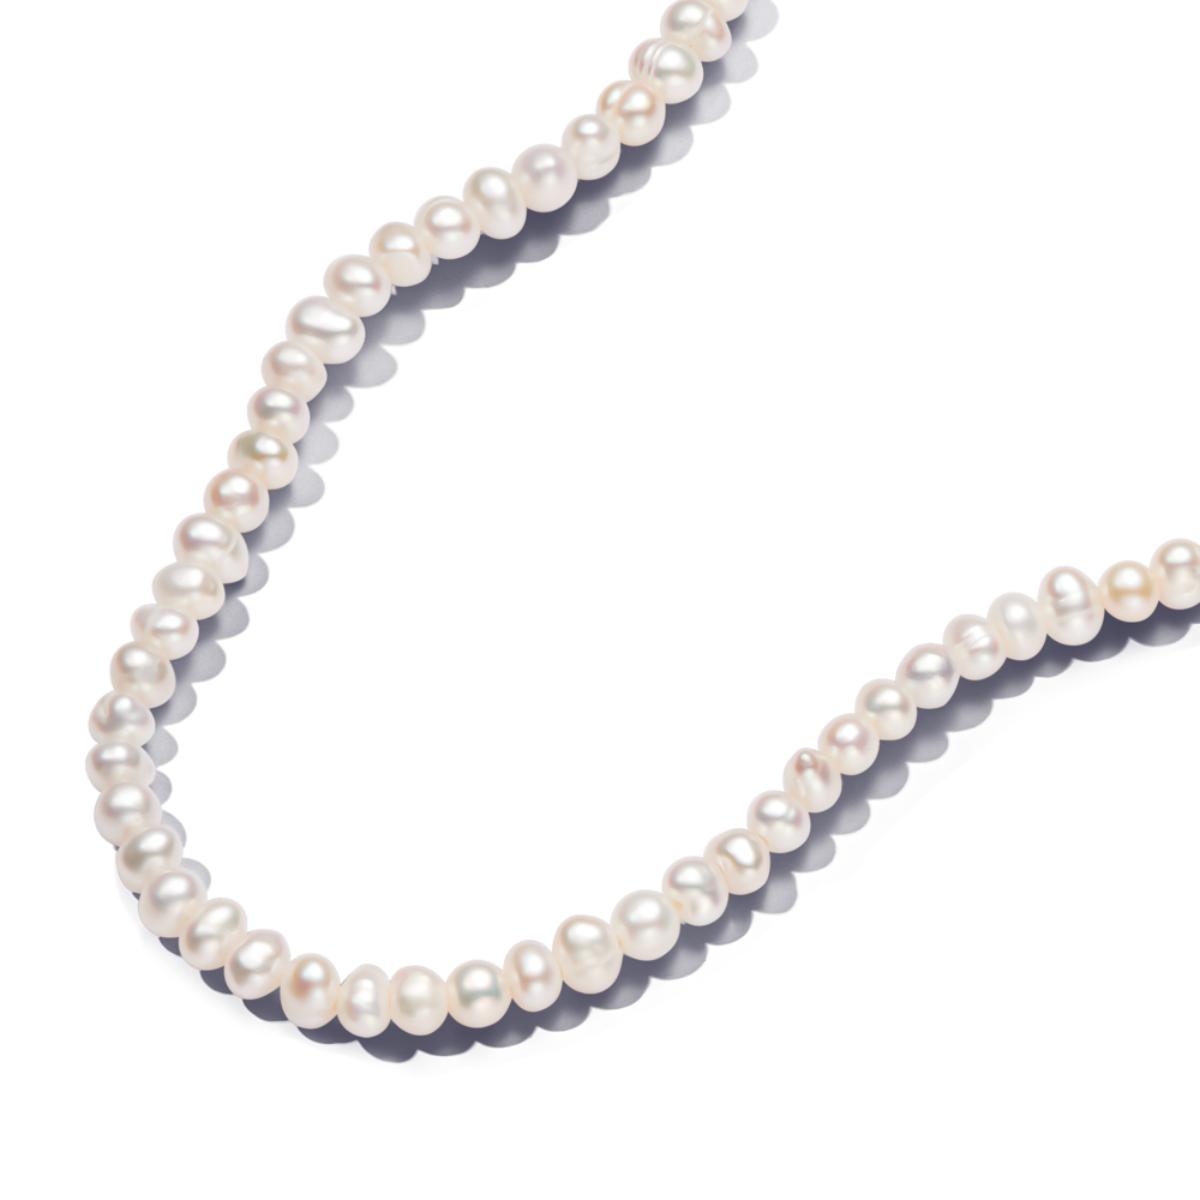 Treated Freshwater Cultured Pearls T-bar Collier Necklace